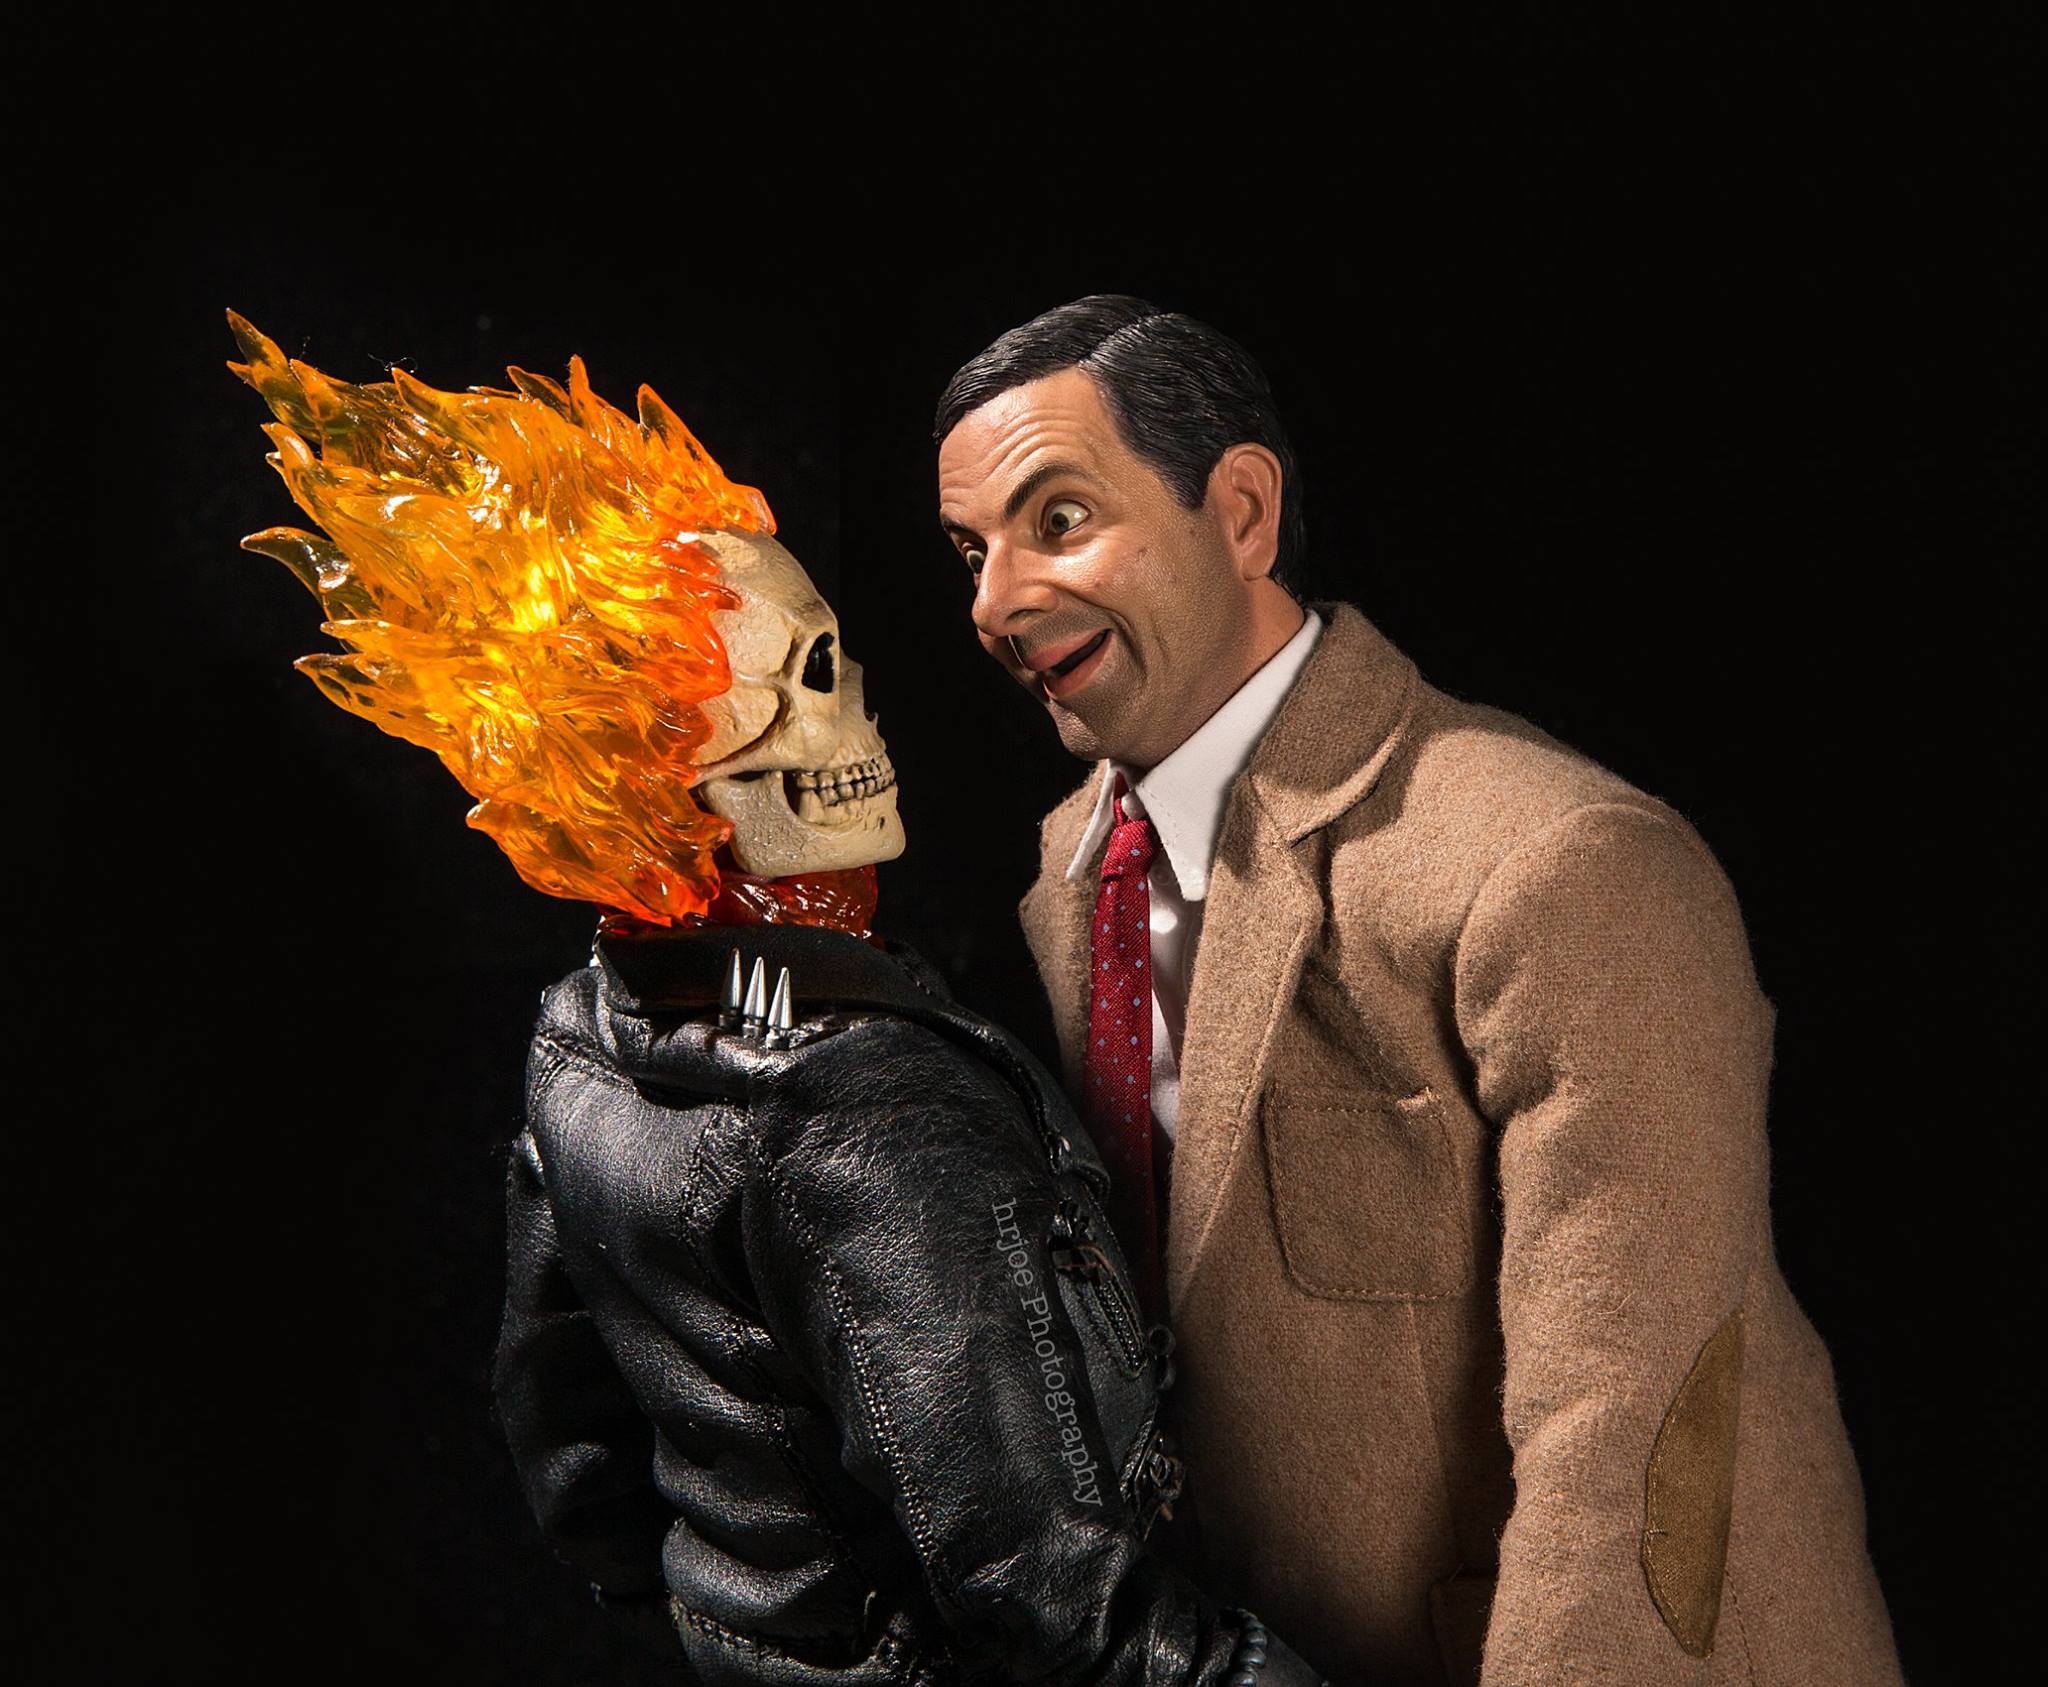 Funny Ghost Rider And Mr.Bean Action Figure Ph Wallpaper